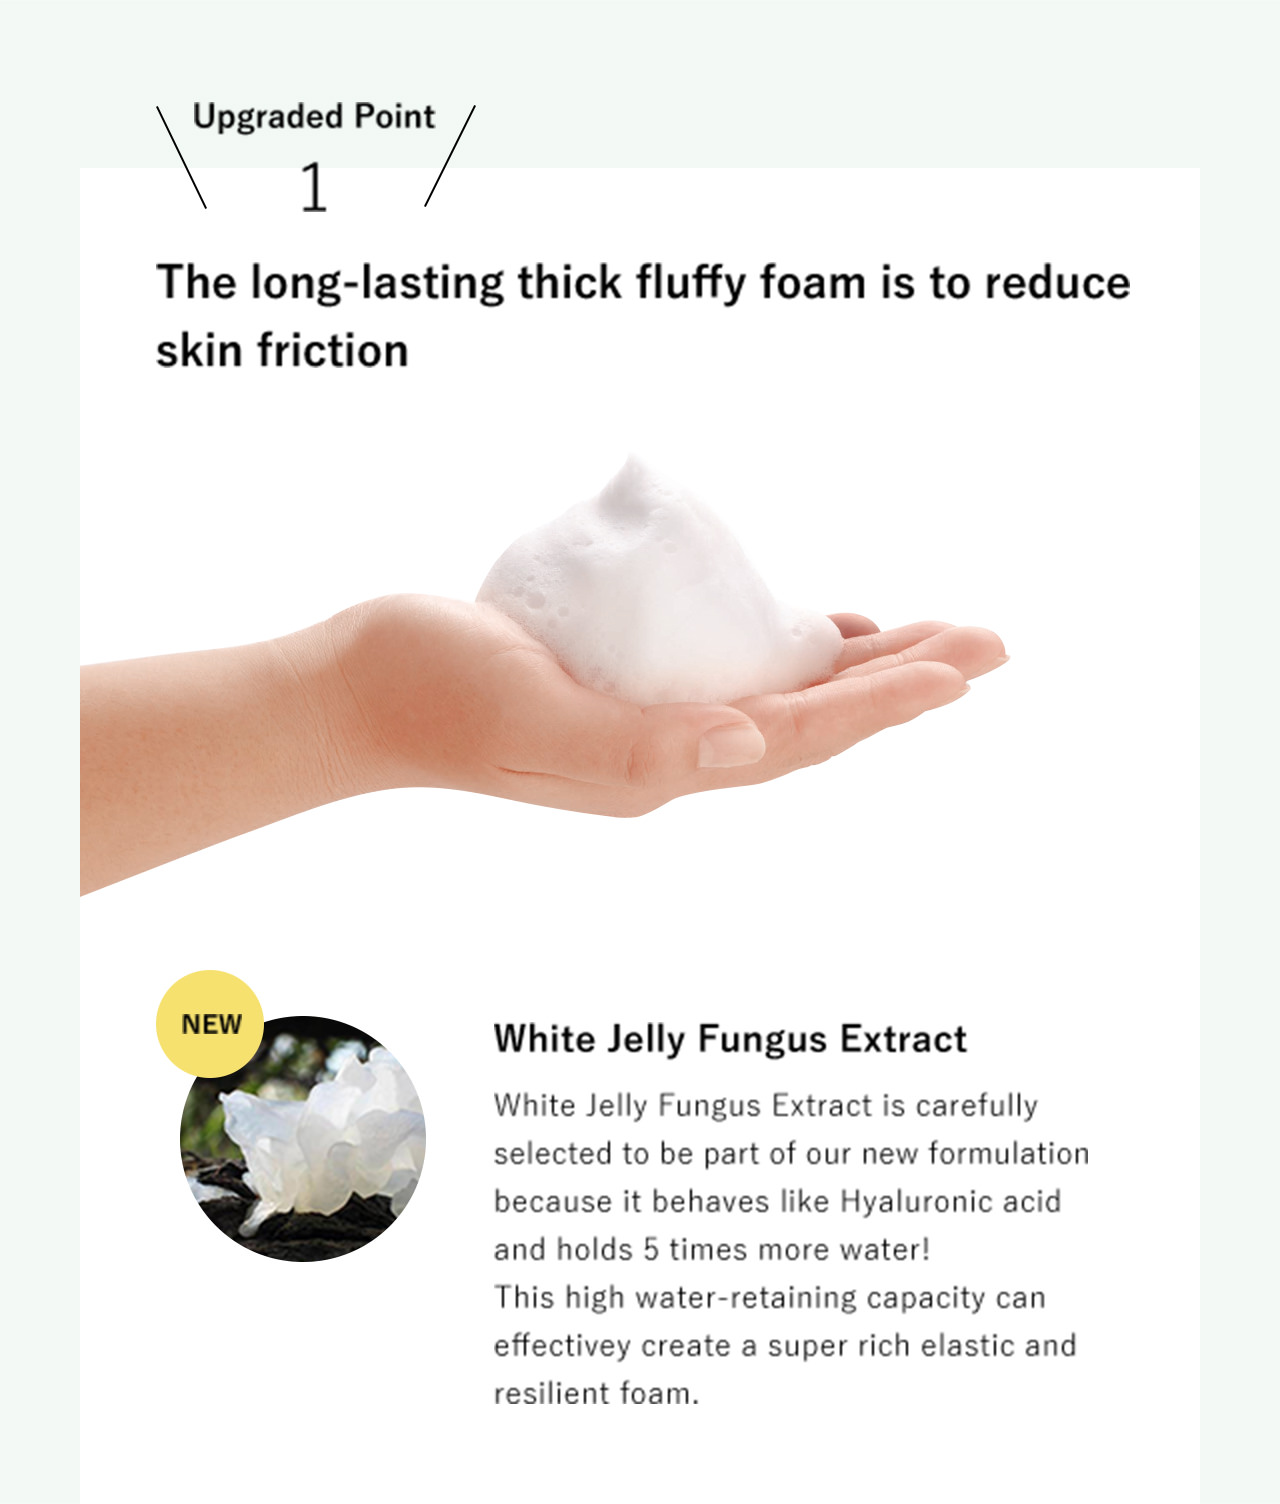 Upgraded Point 1: The long-lasting thick fluffy foam is to reduce skin friction